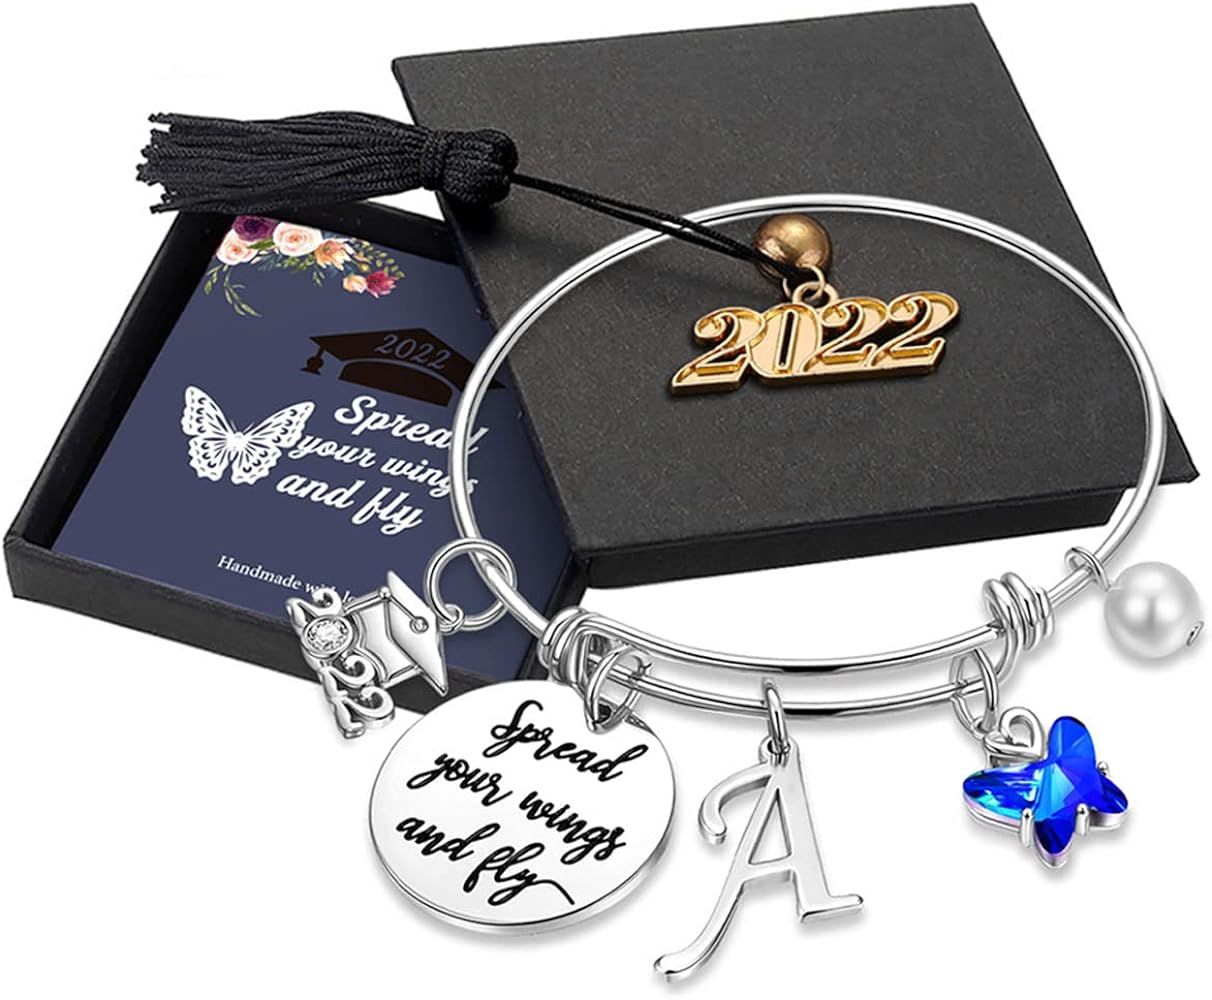 Graduation Gifts for Her 2022 Butterfly Bracelet,Inspirational Bangle with 2022 Graduation Grad Cap  | Amazon (US)